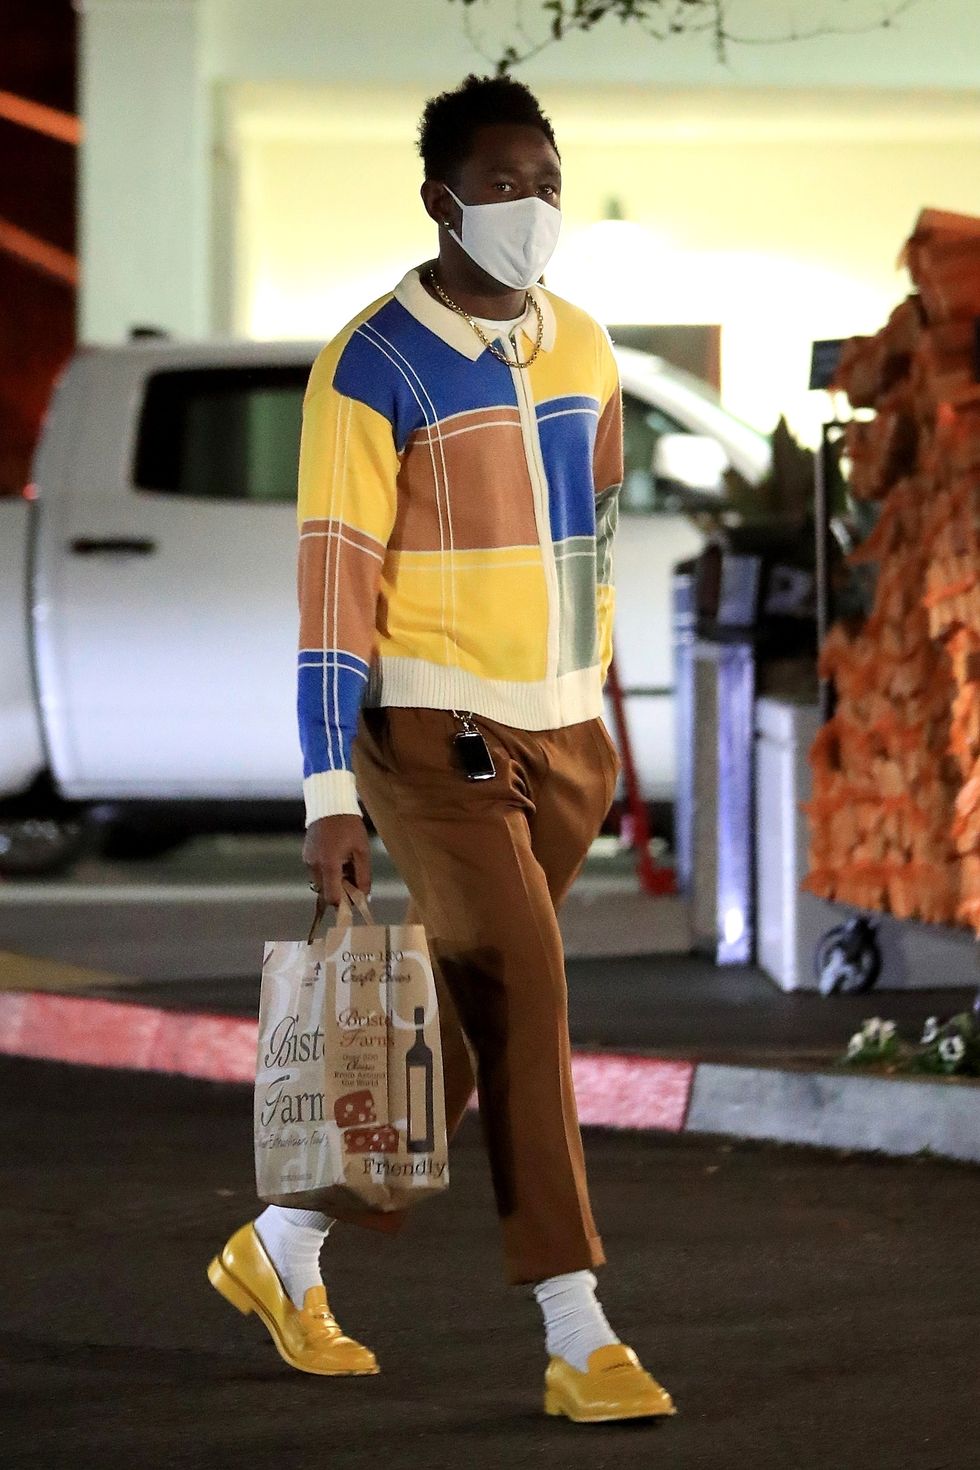 beverly hills, ca    exclusive tyler, the creator was spotted shopping for groceries wearing a yellow sweater and matching shoes at bristol farms in beverly hills tyler is wearing a uniqlo face maskpictured tyler, the creatorbackgrid usa 8 december 2020 usa 1 310 798 9111  usasalesbackgridcomuk 44 208 344 2007  uksalesbackgridcomuk clients   pictures containing childrenplease pixelate face prior to publication